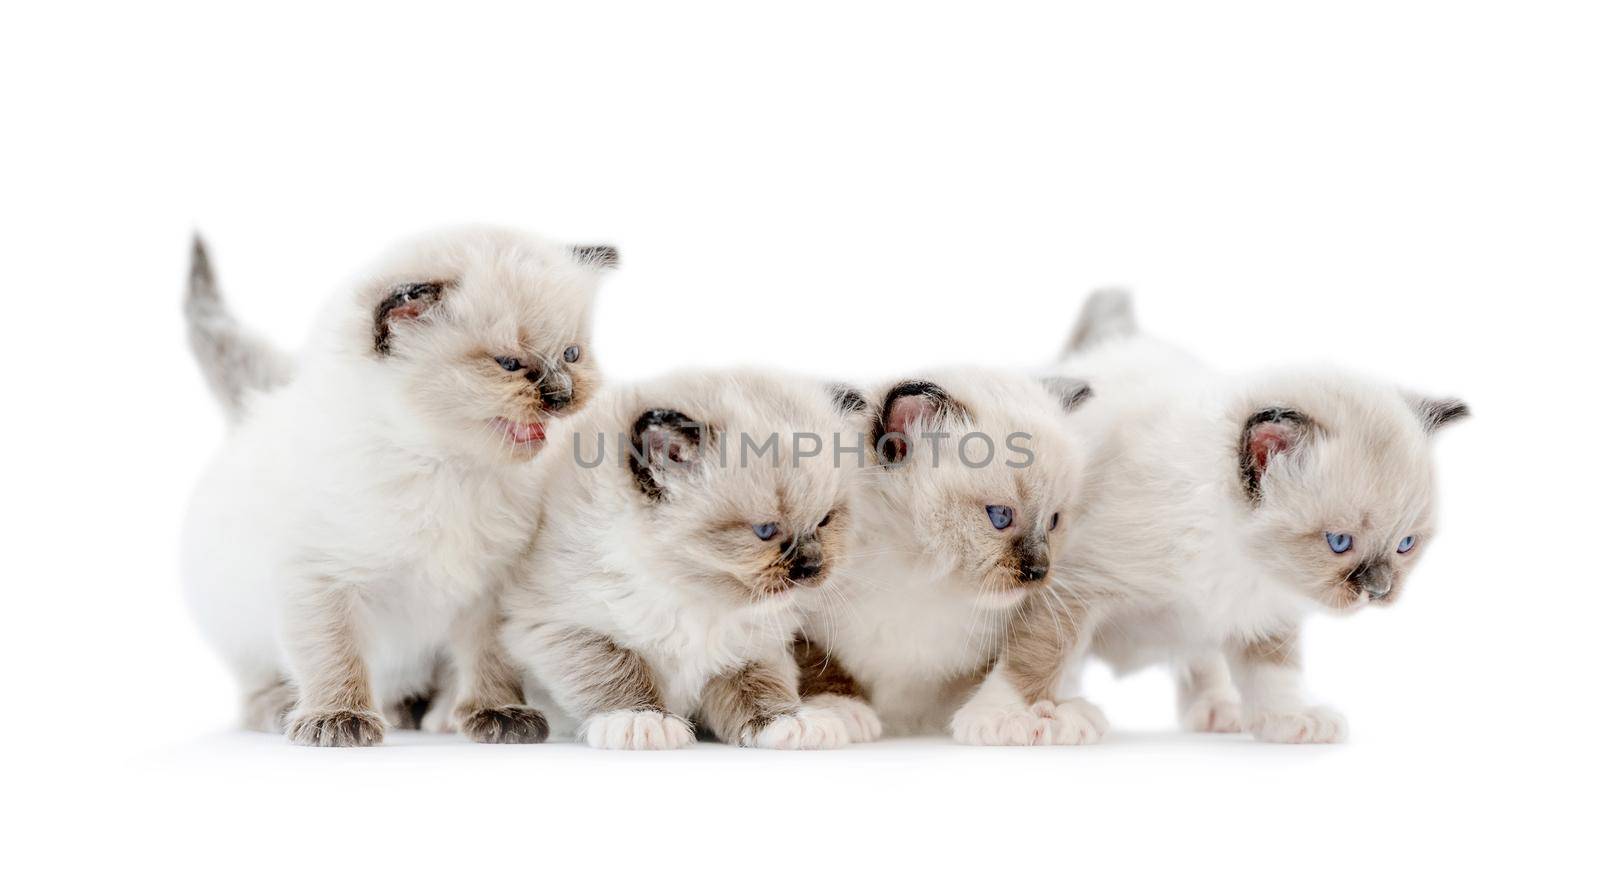 Four ragdoll kittens isolated on white background with copyspace. Domestic fluffy purebred kitty pets standing together